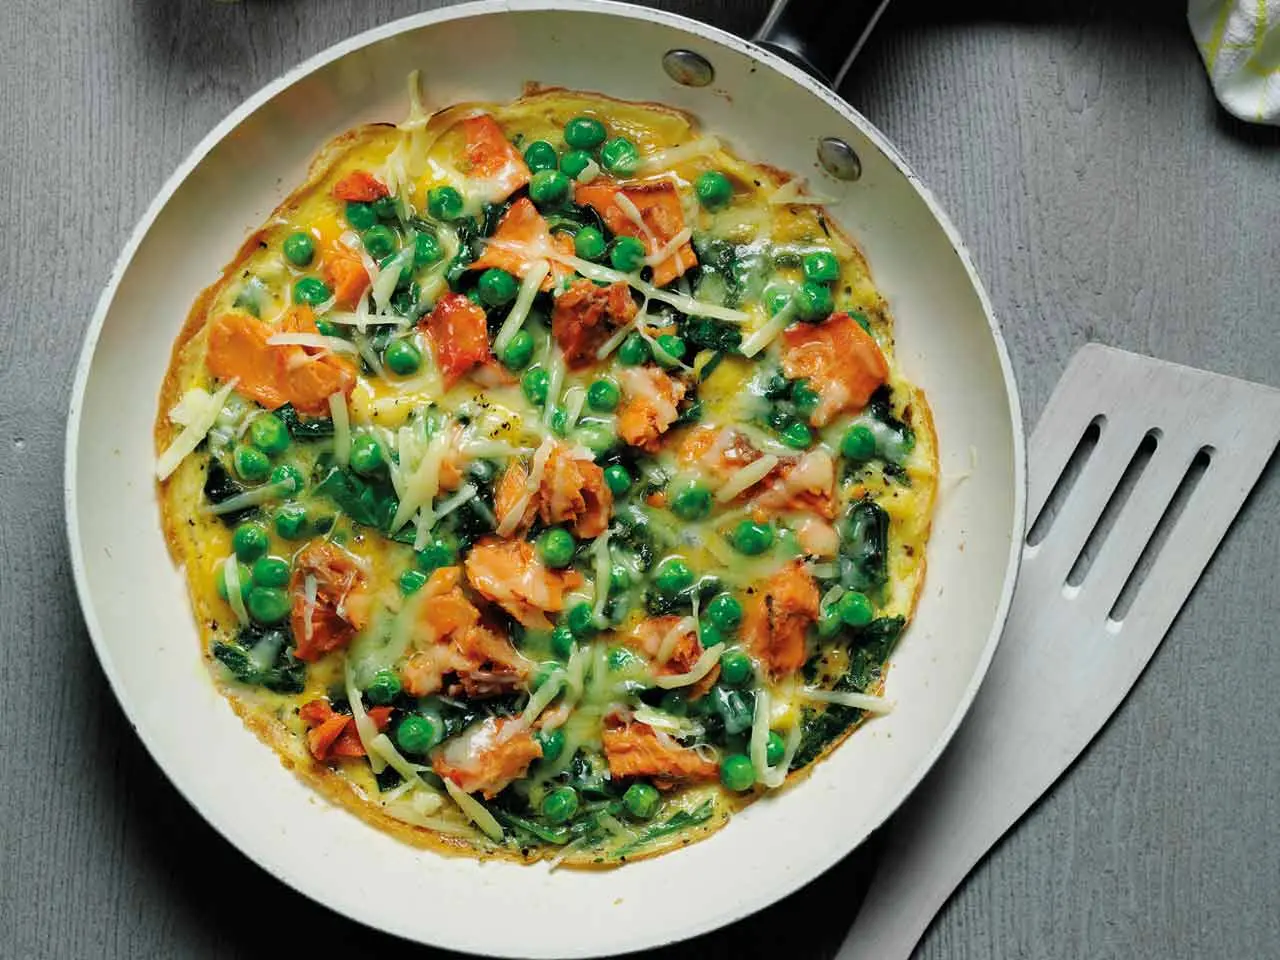 smoked salmon and spinach omelette - Do you add milk to omelette or scrambled eggs